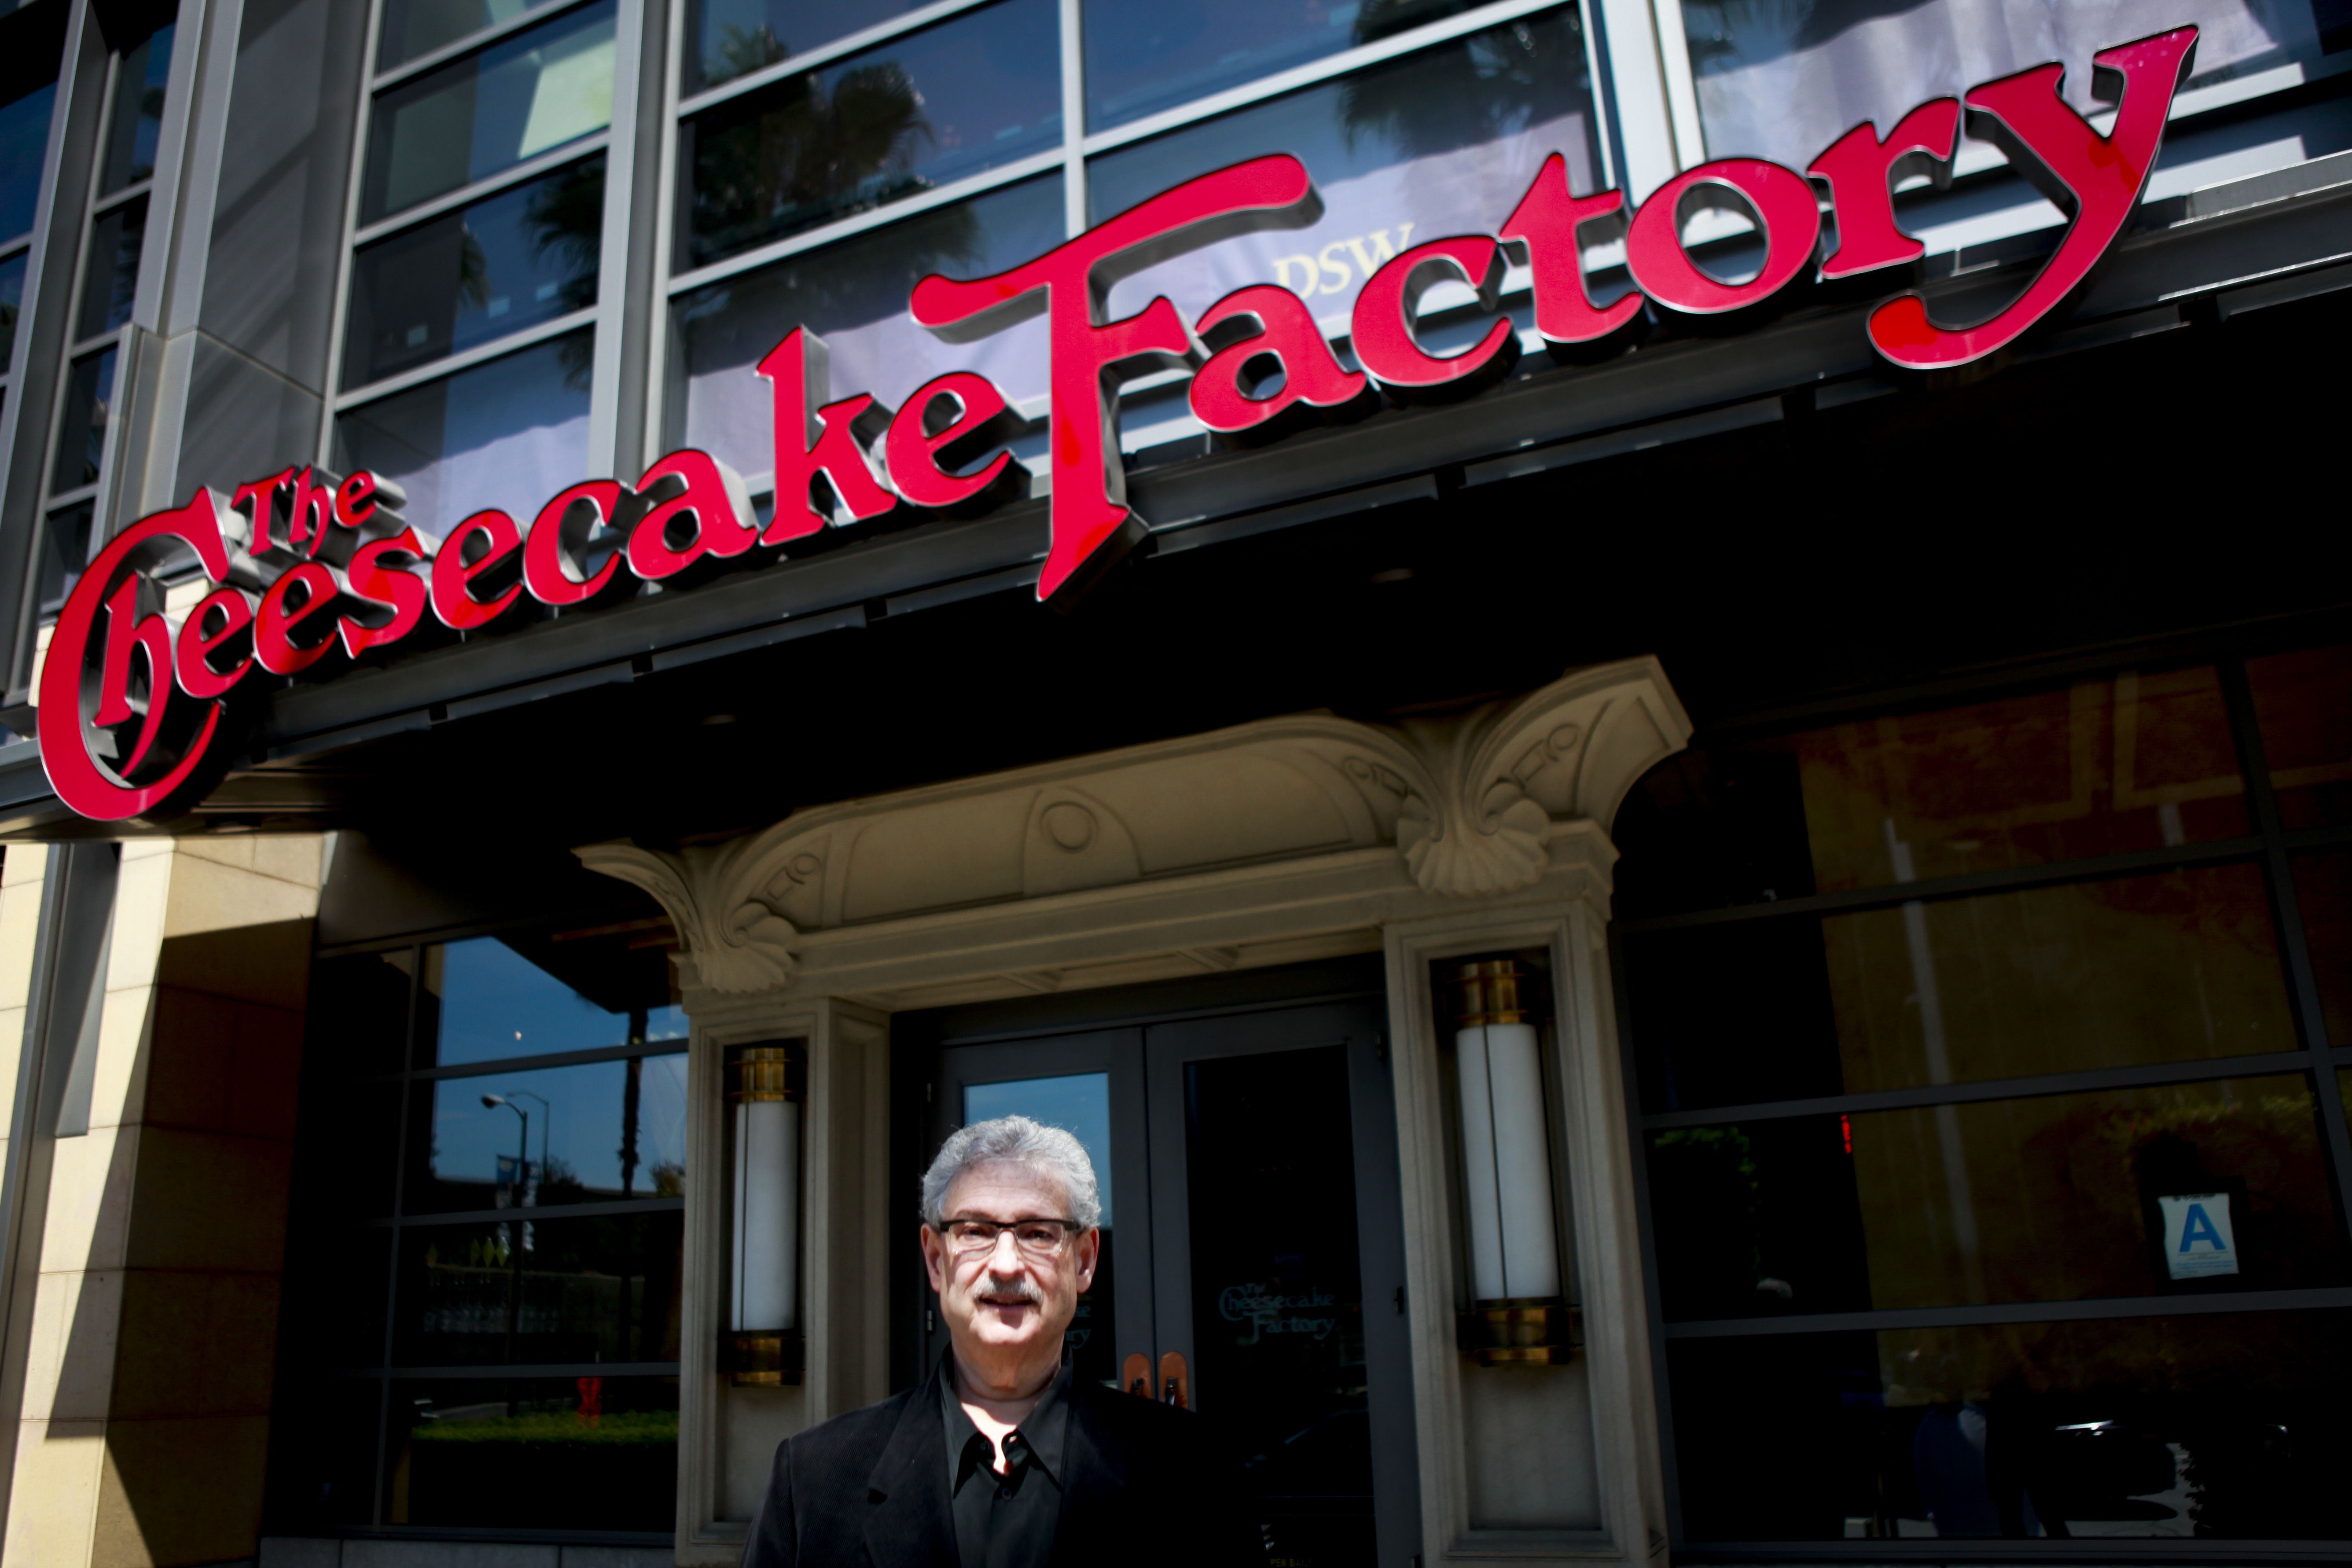 Cheesecake Factory tells its landlords it won't be able to pay